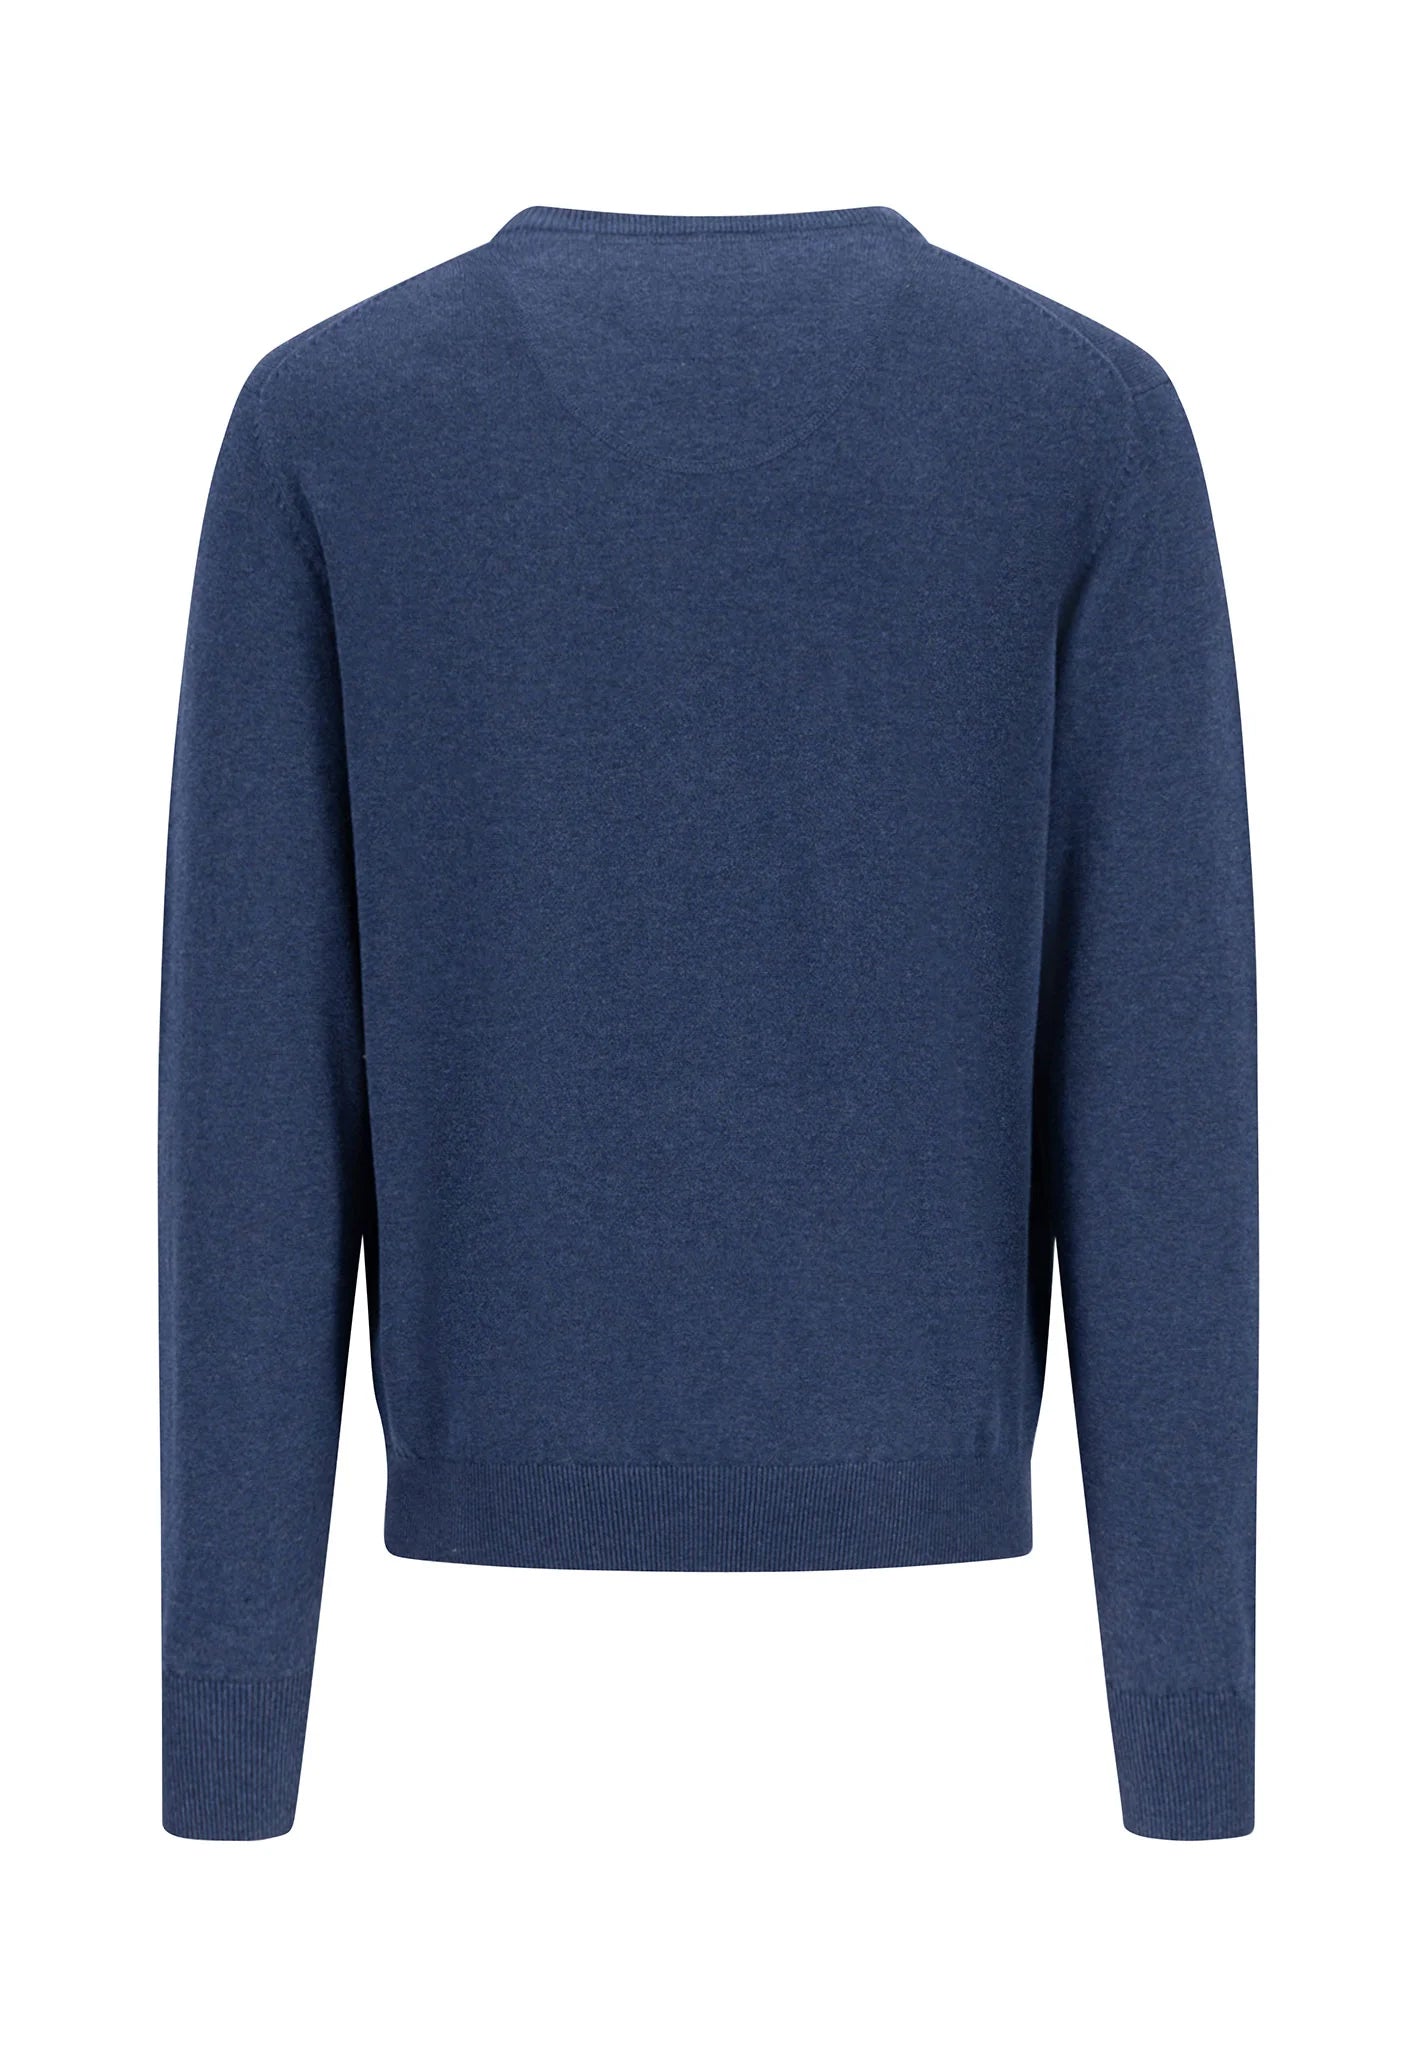 FINE-KNIT SWEATER WITH A CREW NECK - Night